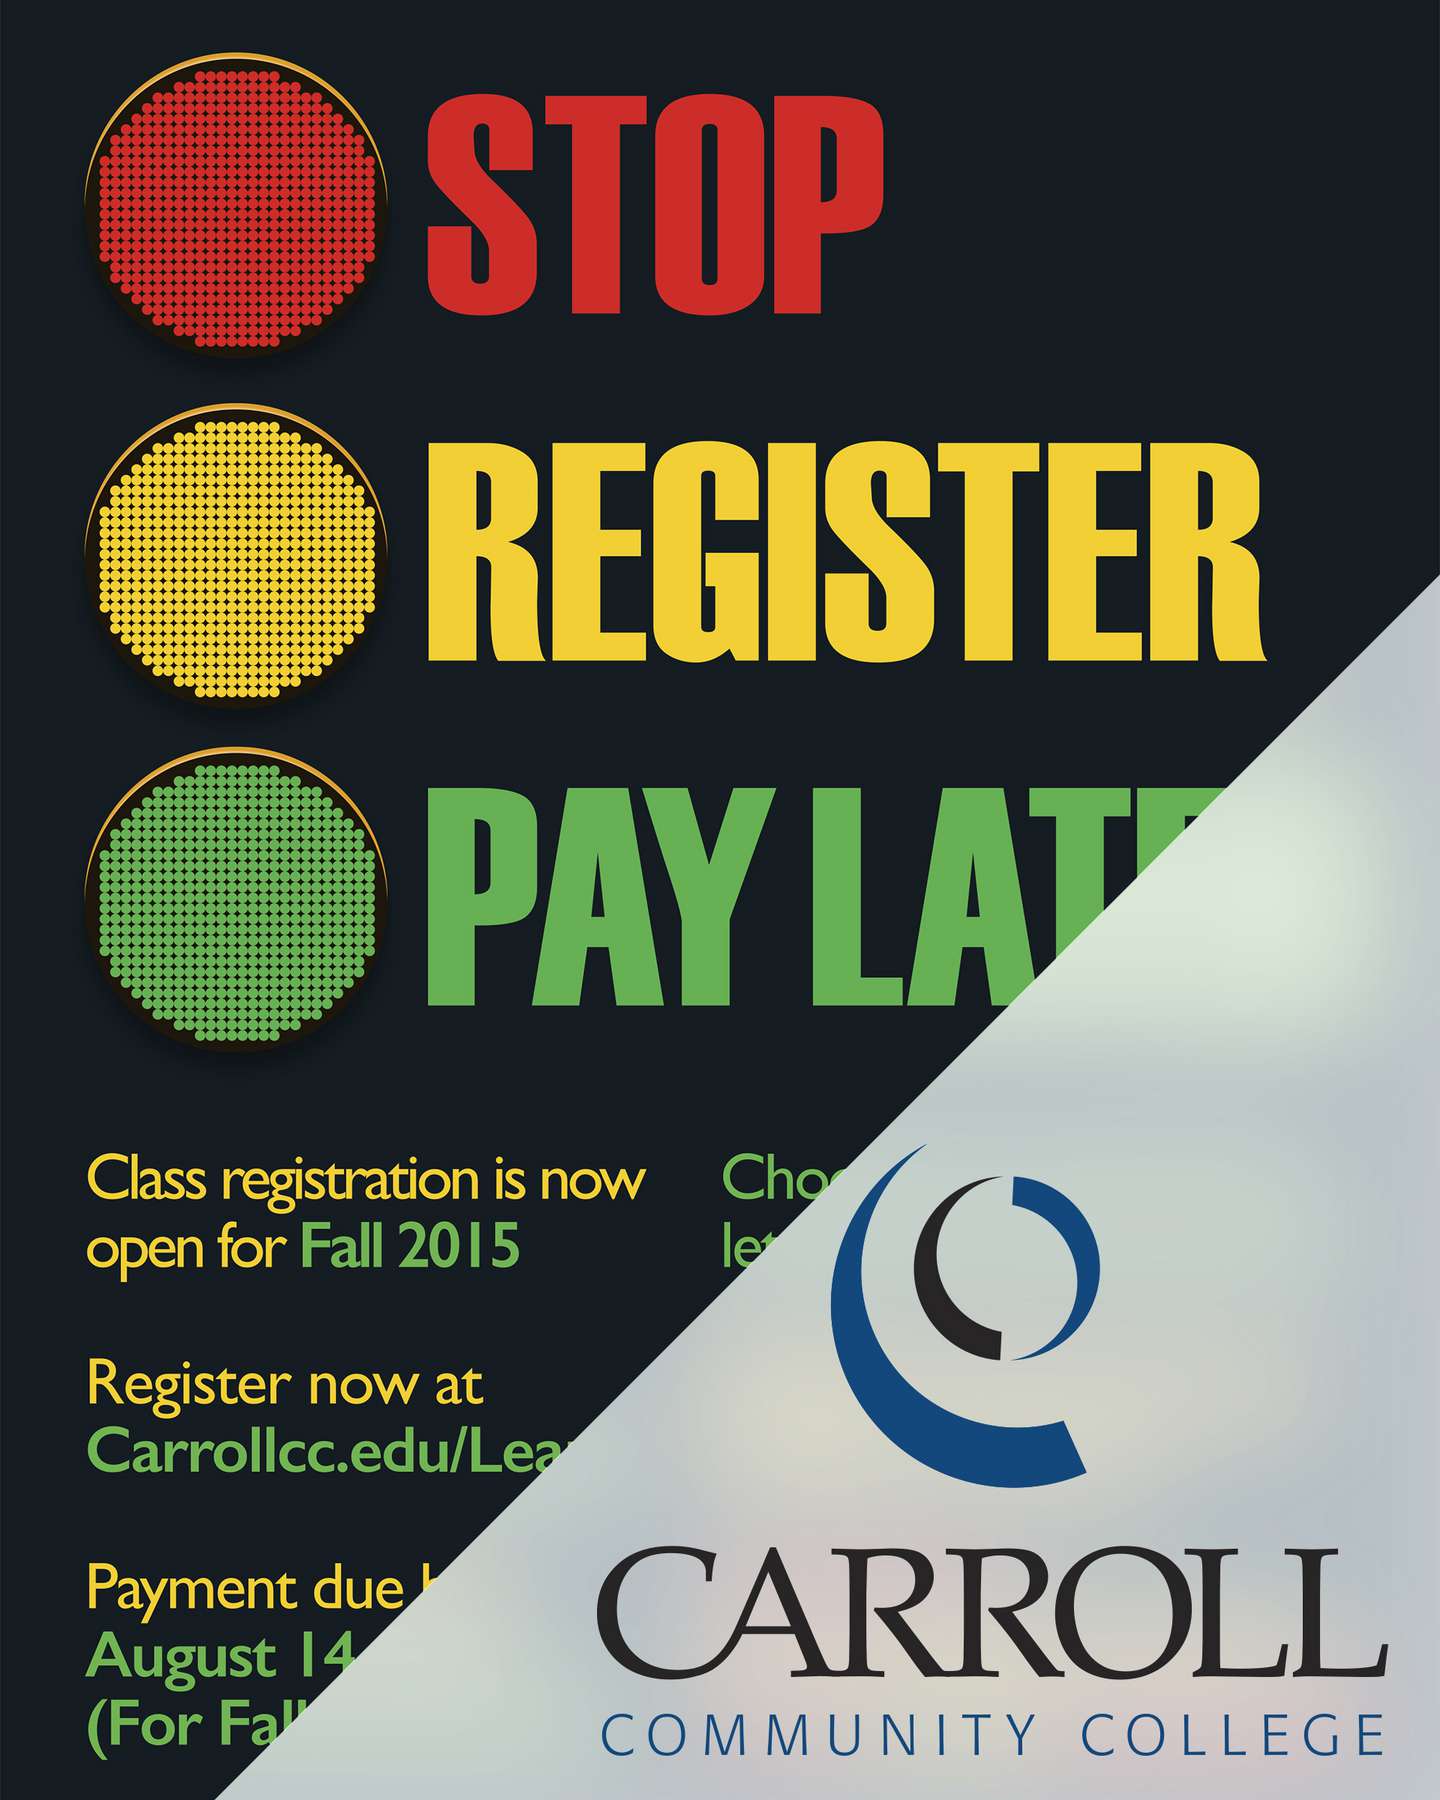 A poster reading Stop, Register, Pay Later in large lettering next to an illustrated traffic light.